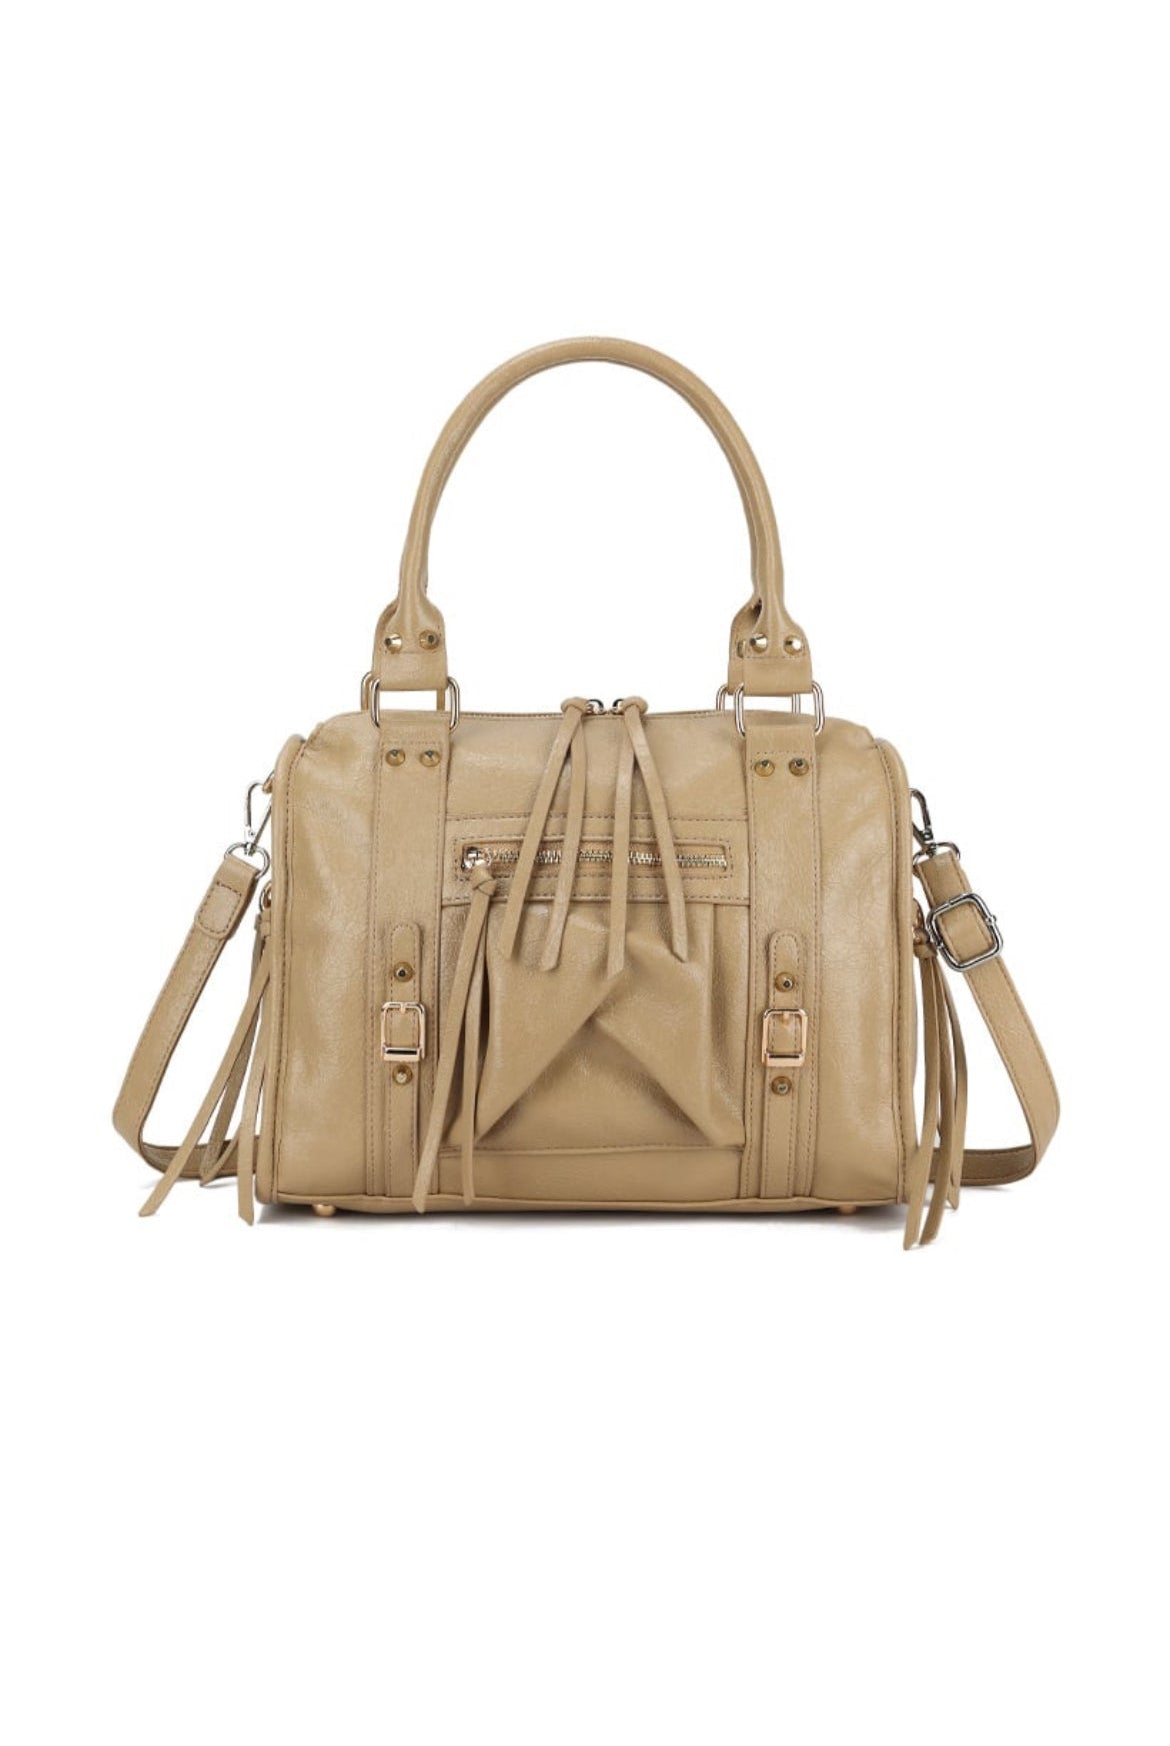 IT GIRL BAG TAUPE - My Favourites